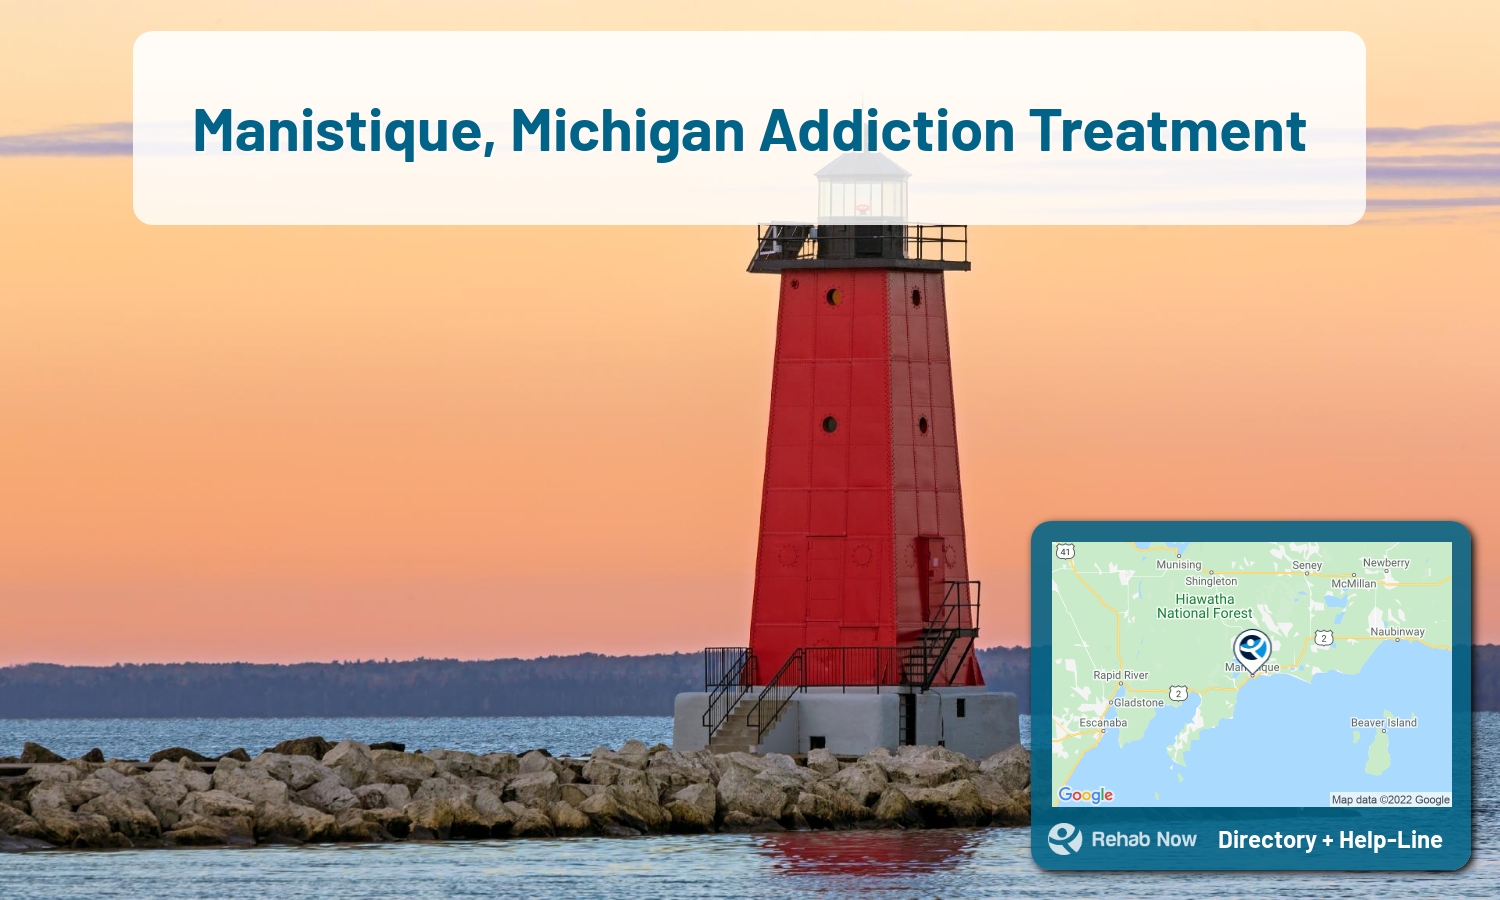 Drug rehab and alcohol treatment services nearby Manistique, MI. Need help choosing a treatment program? Call our free hotline!